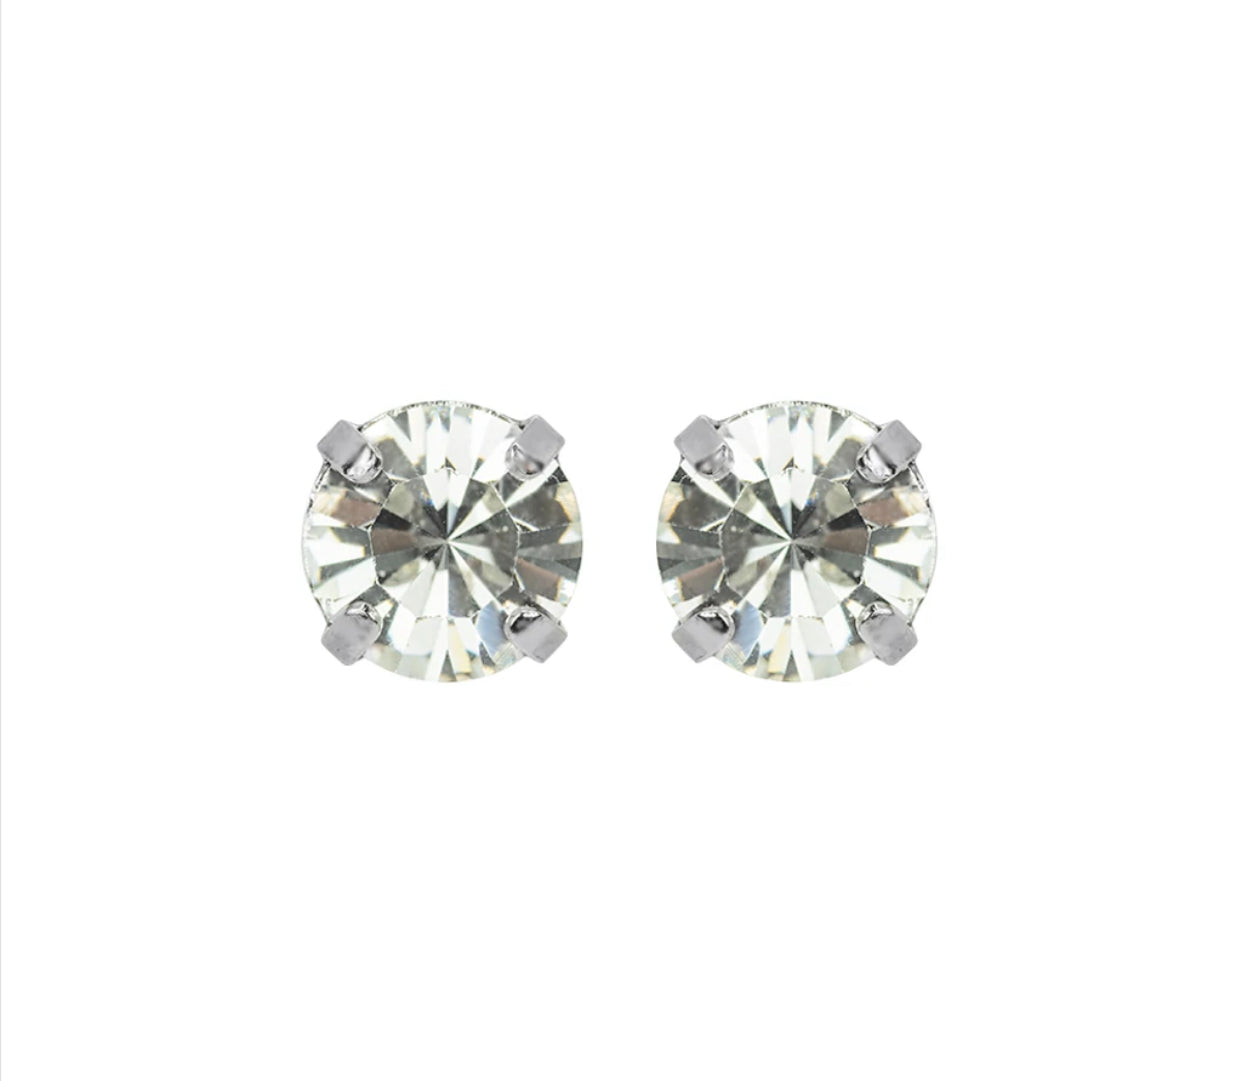 Mariana Silver Petite Crystal Post Earrings in “On a Clear Day”